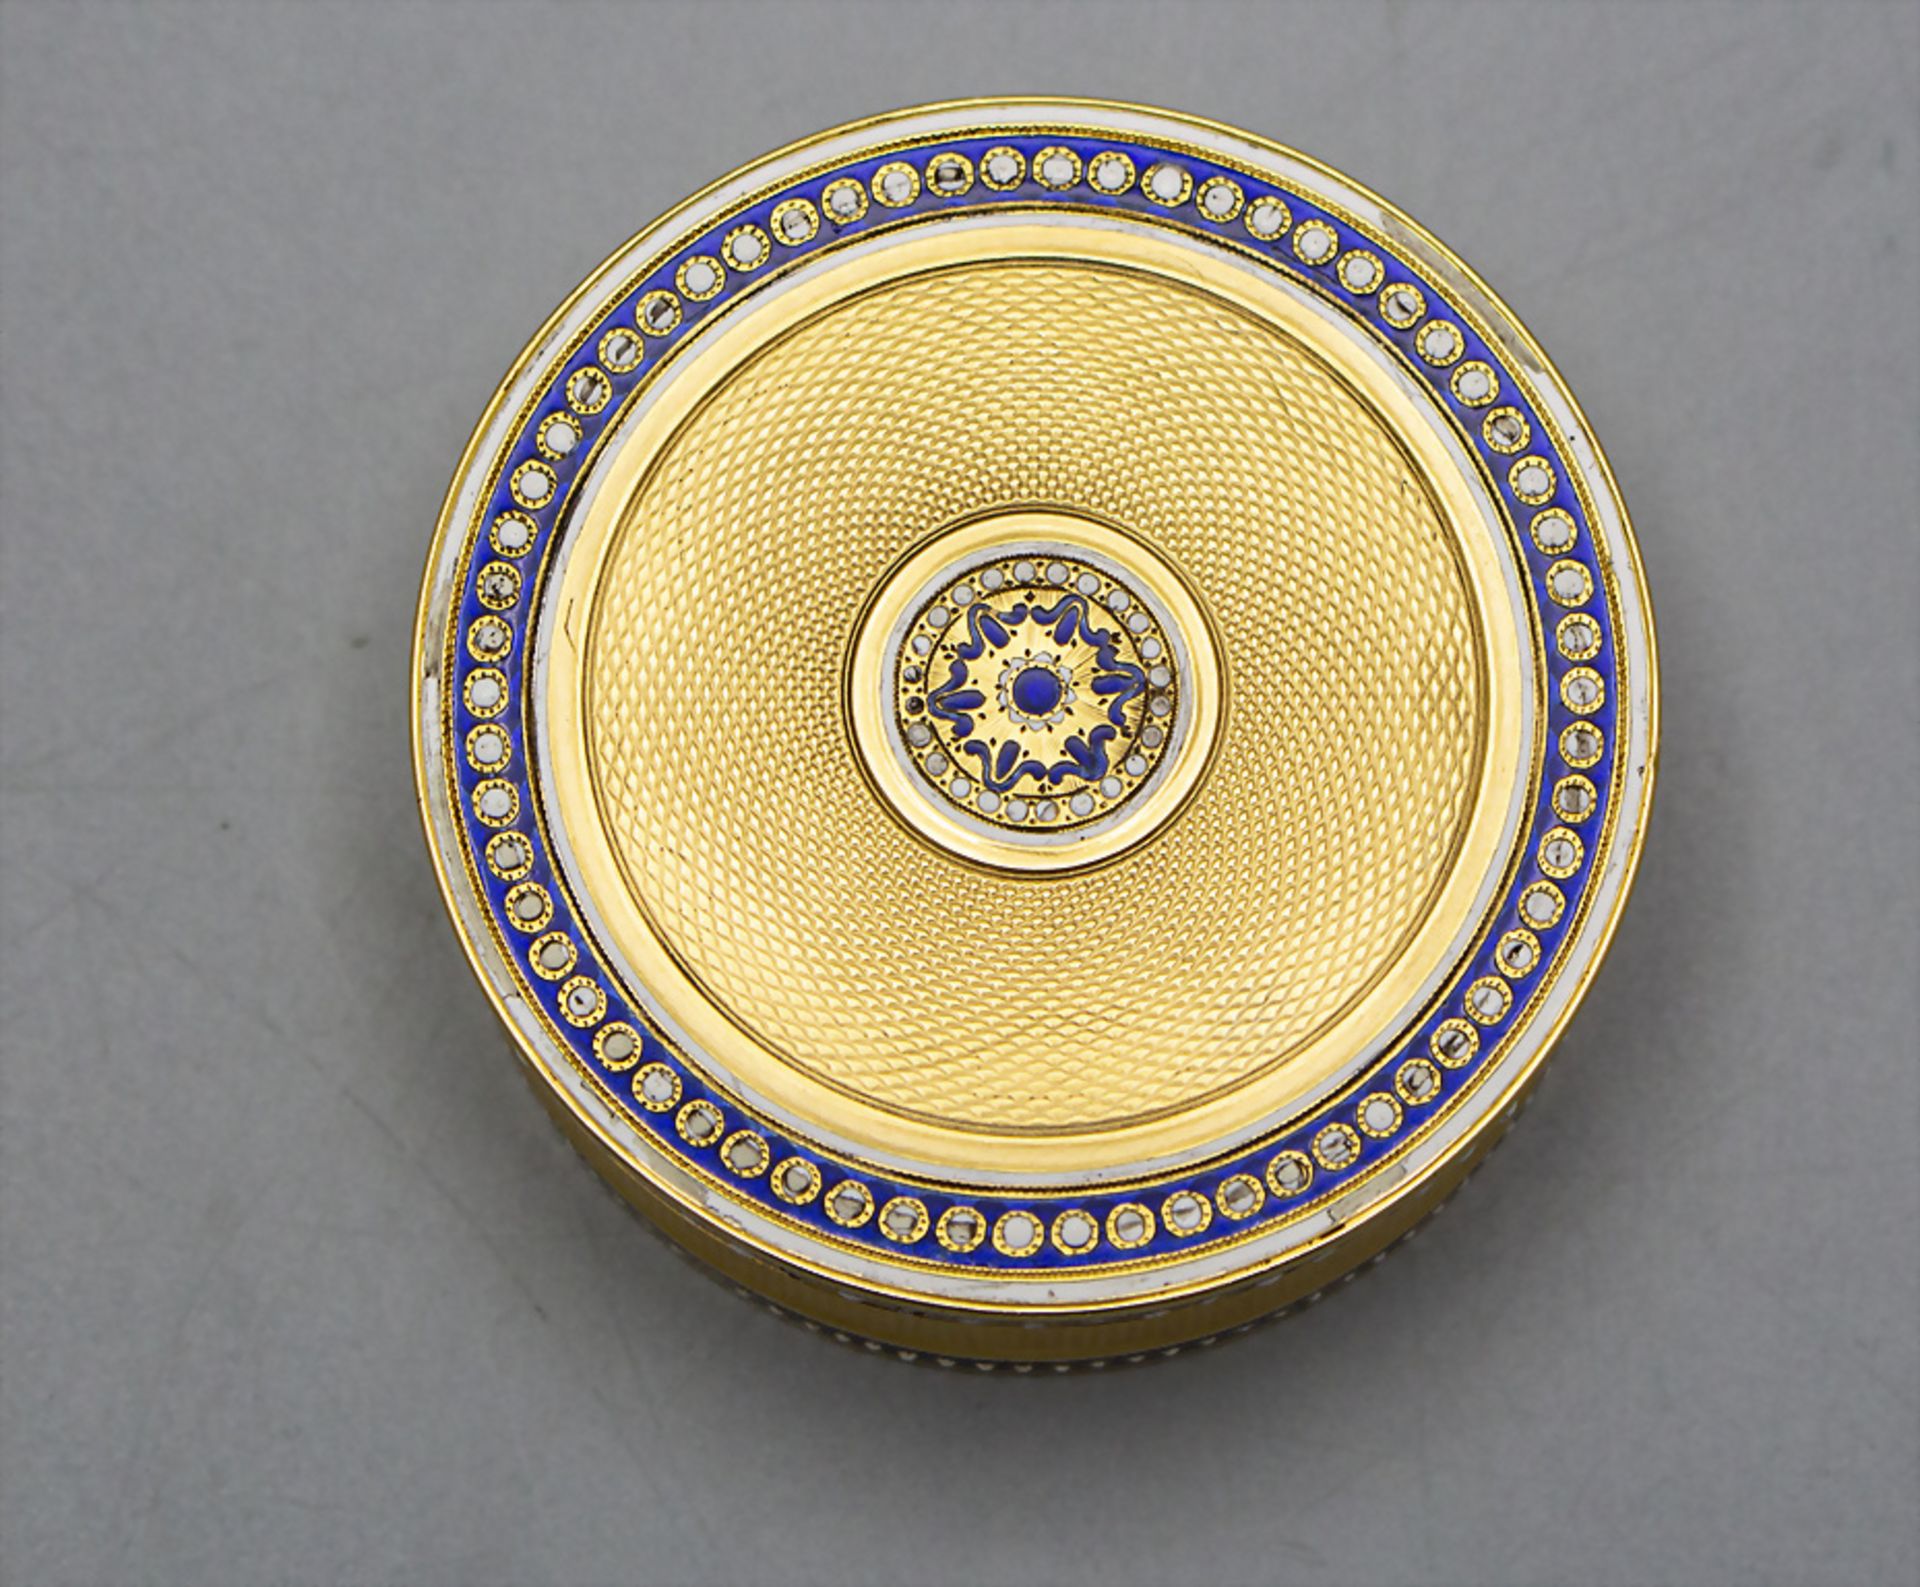 Runde Tabatiere mit Email / Schnupftabakdose / An 18 ct snuff box with enamel, Joseph-Etienne ... - Image 2 of 8